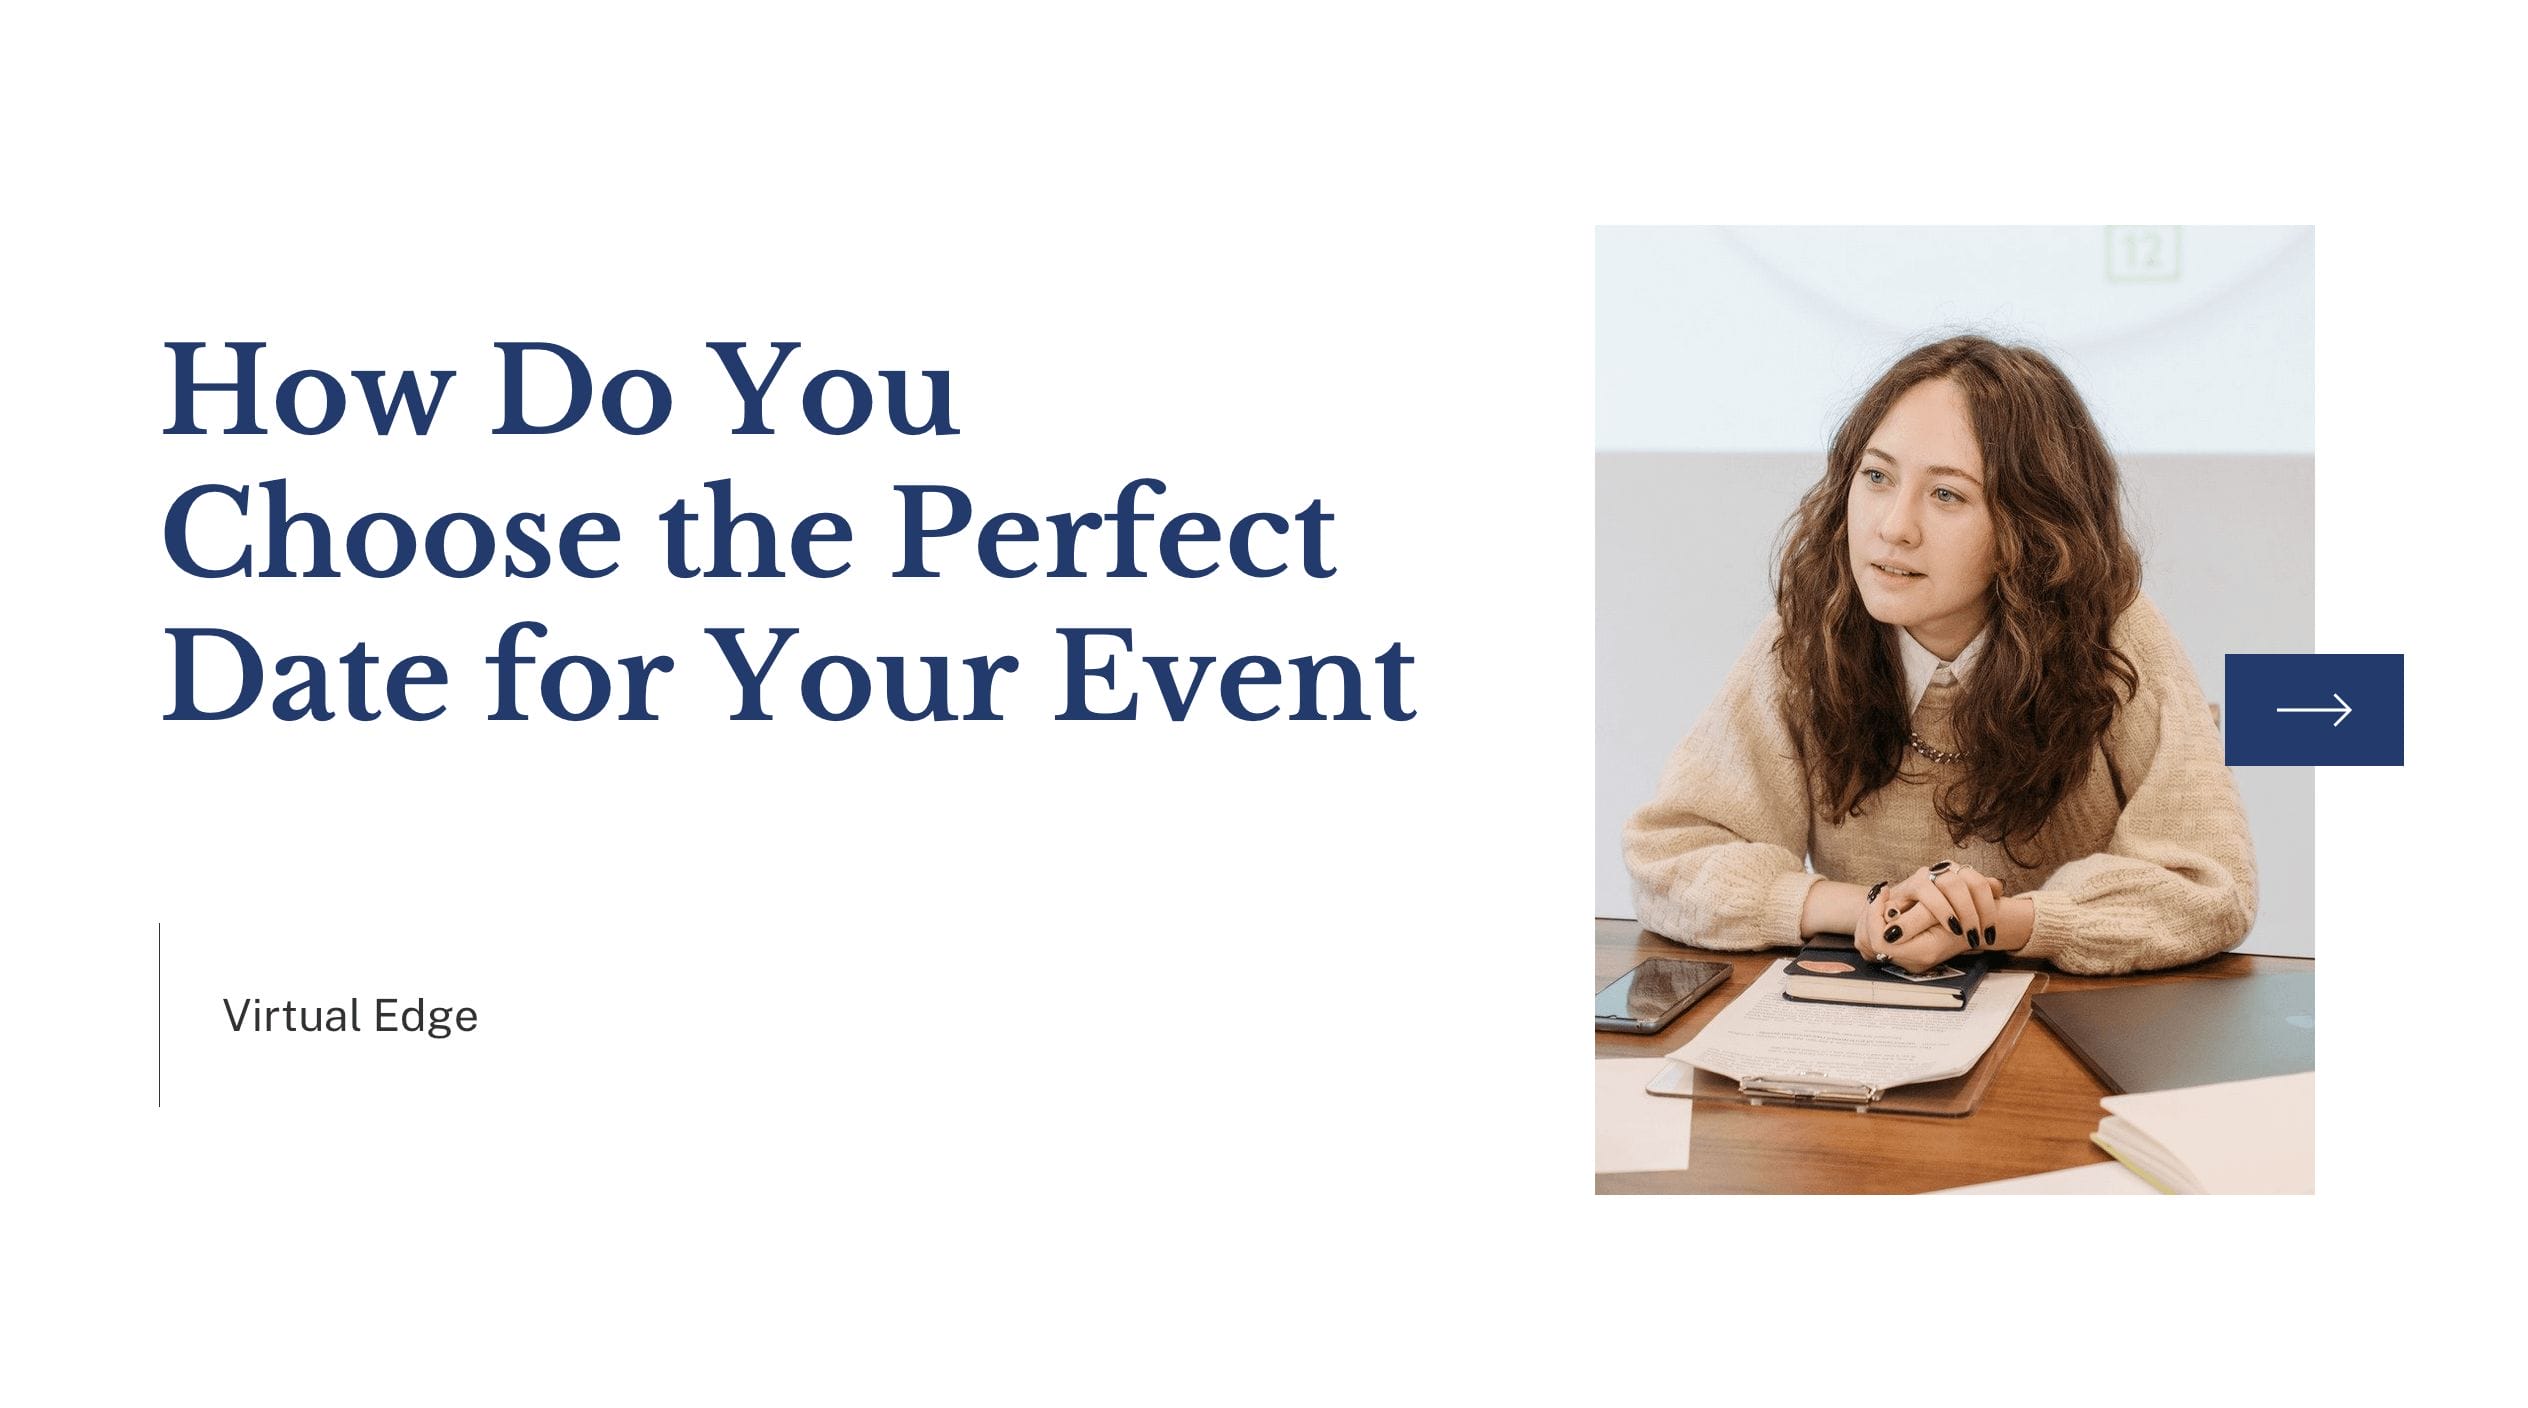 How Do You Choose the Perfect Date for Your Event